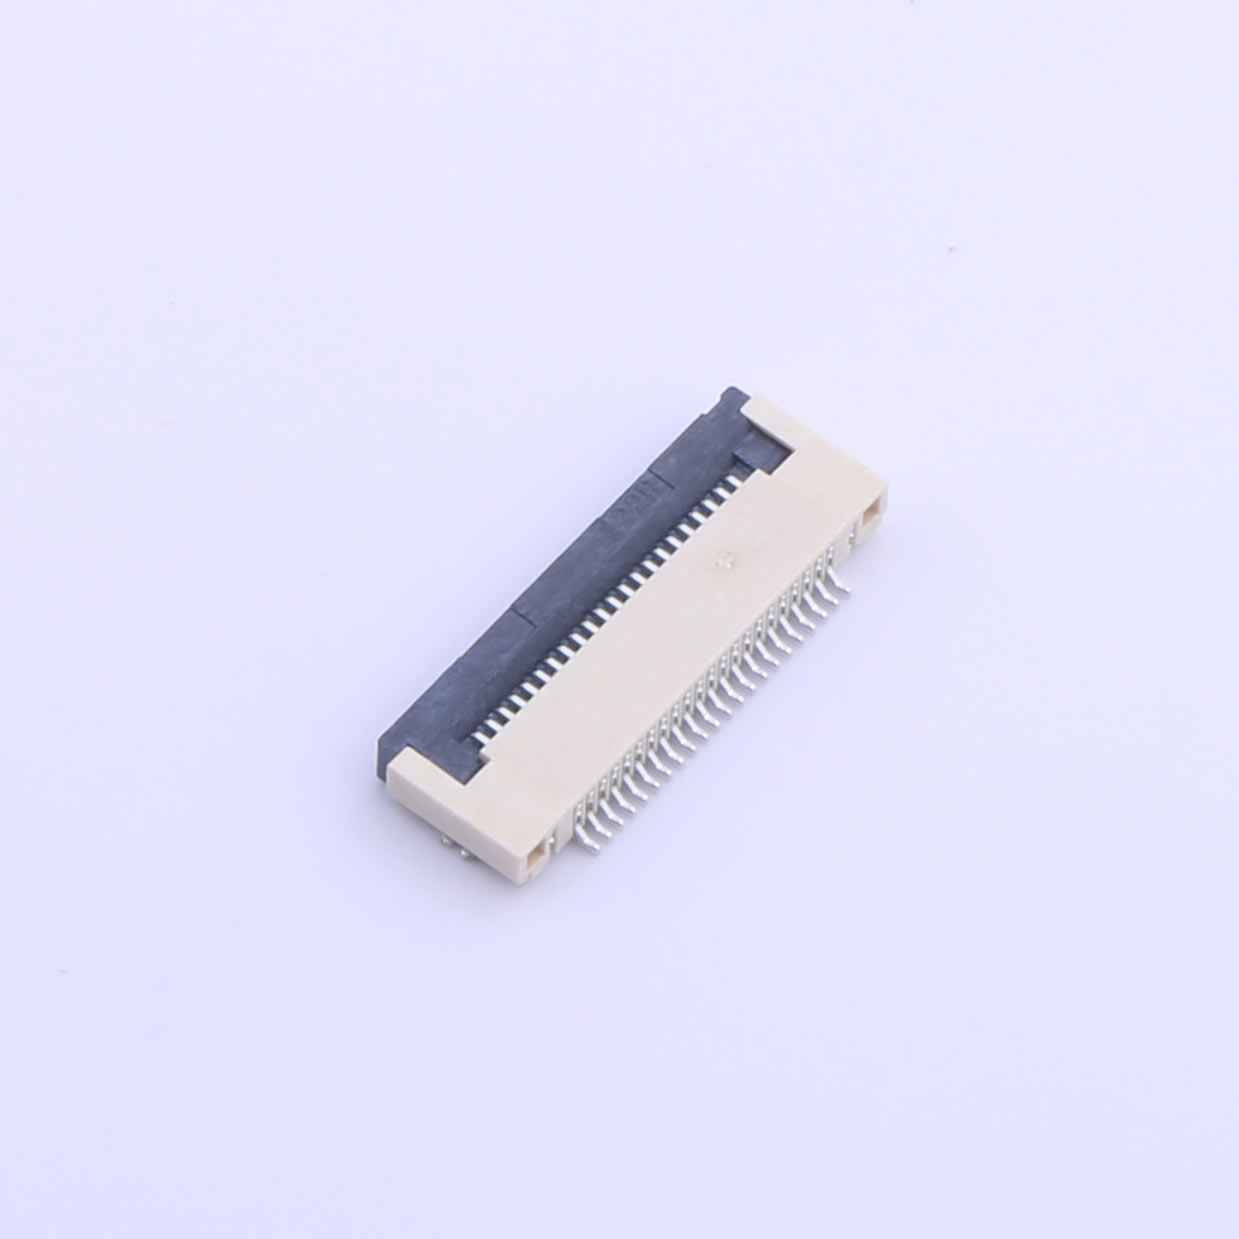 Kinghelm FFC/FPC Connector 22Pin Pitch 0.5mm - KH-FG0.5-H2.0-22pin